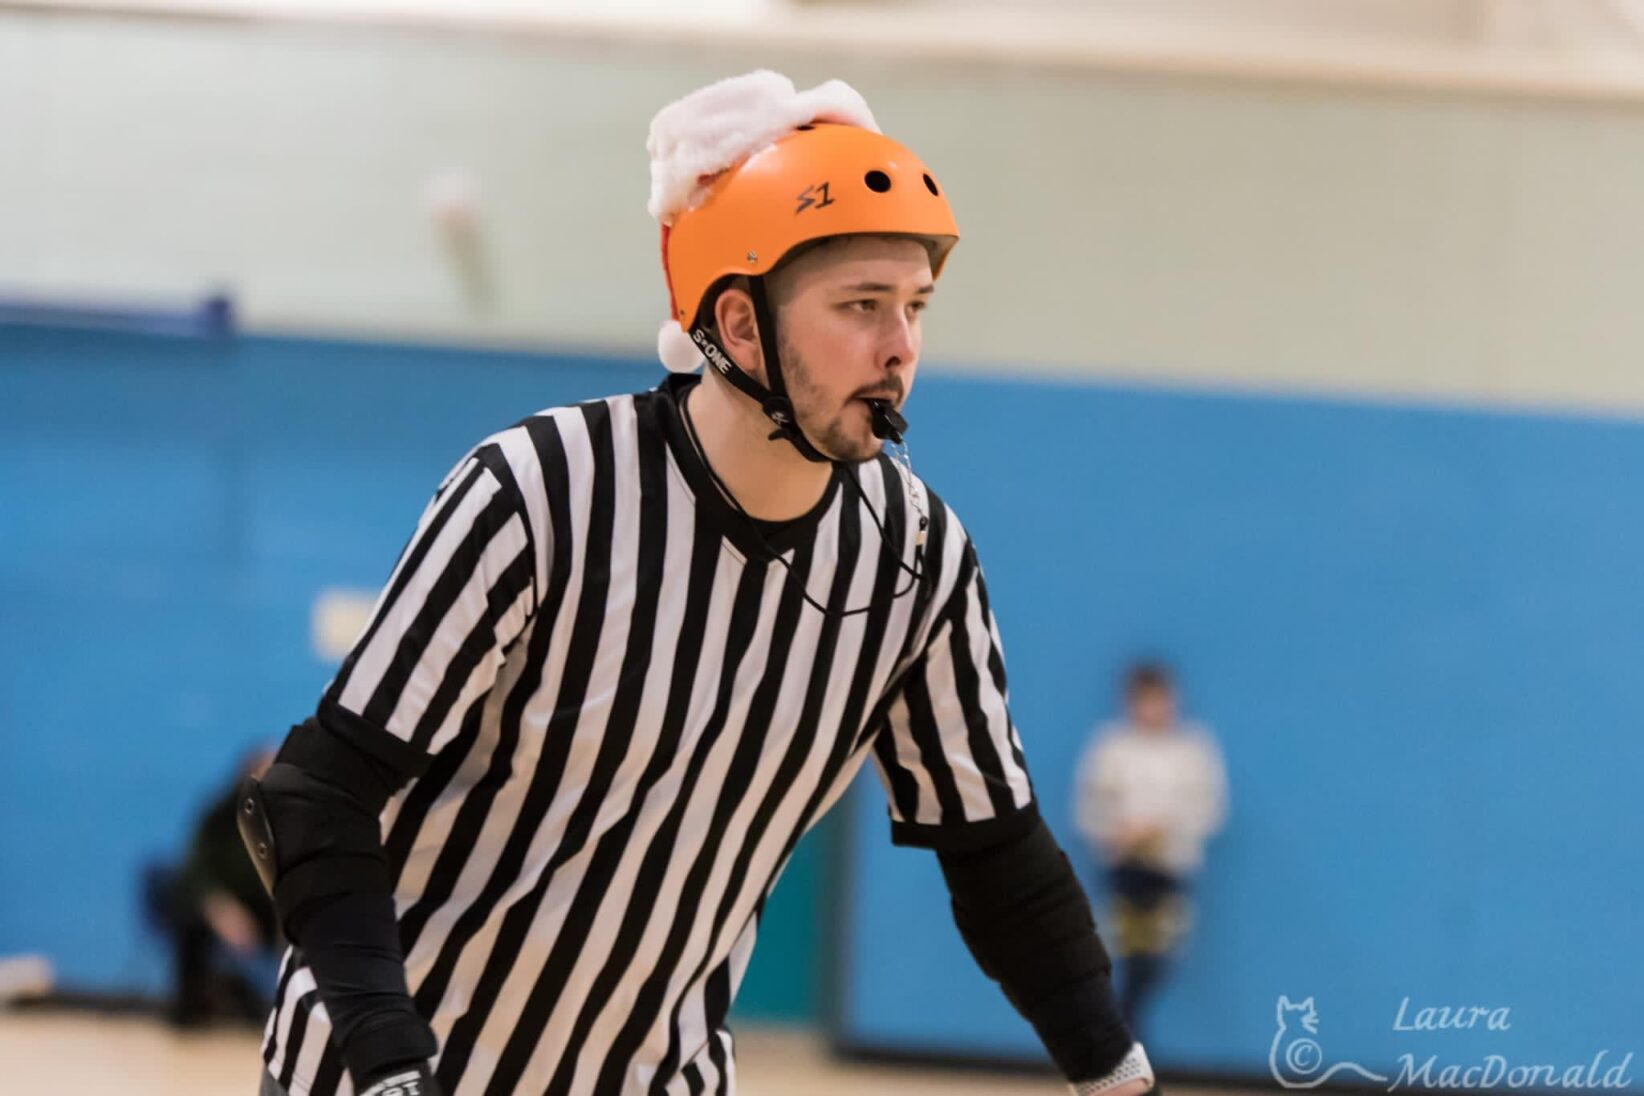 Full gear, big ideas: Bringing my roller derby festive referee focus to renewable energy (Picture credit Laura MacDonald)